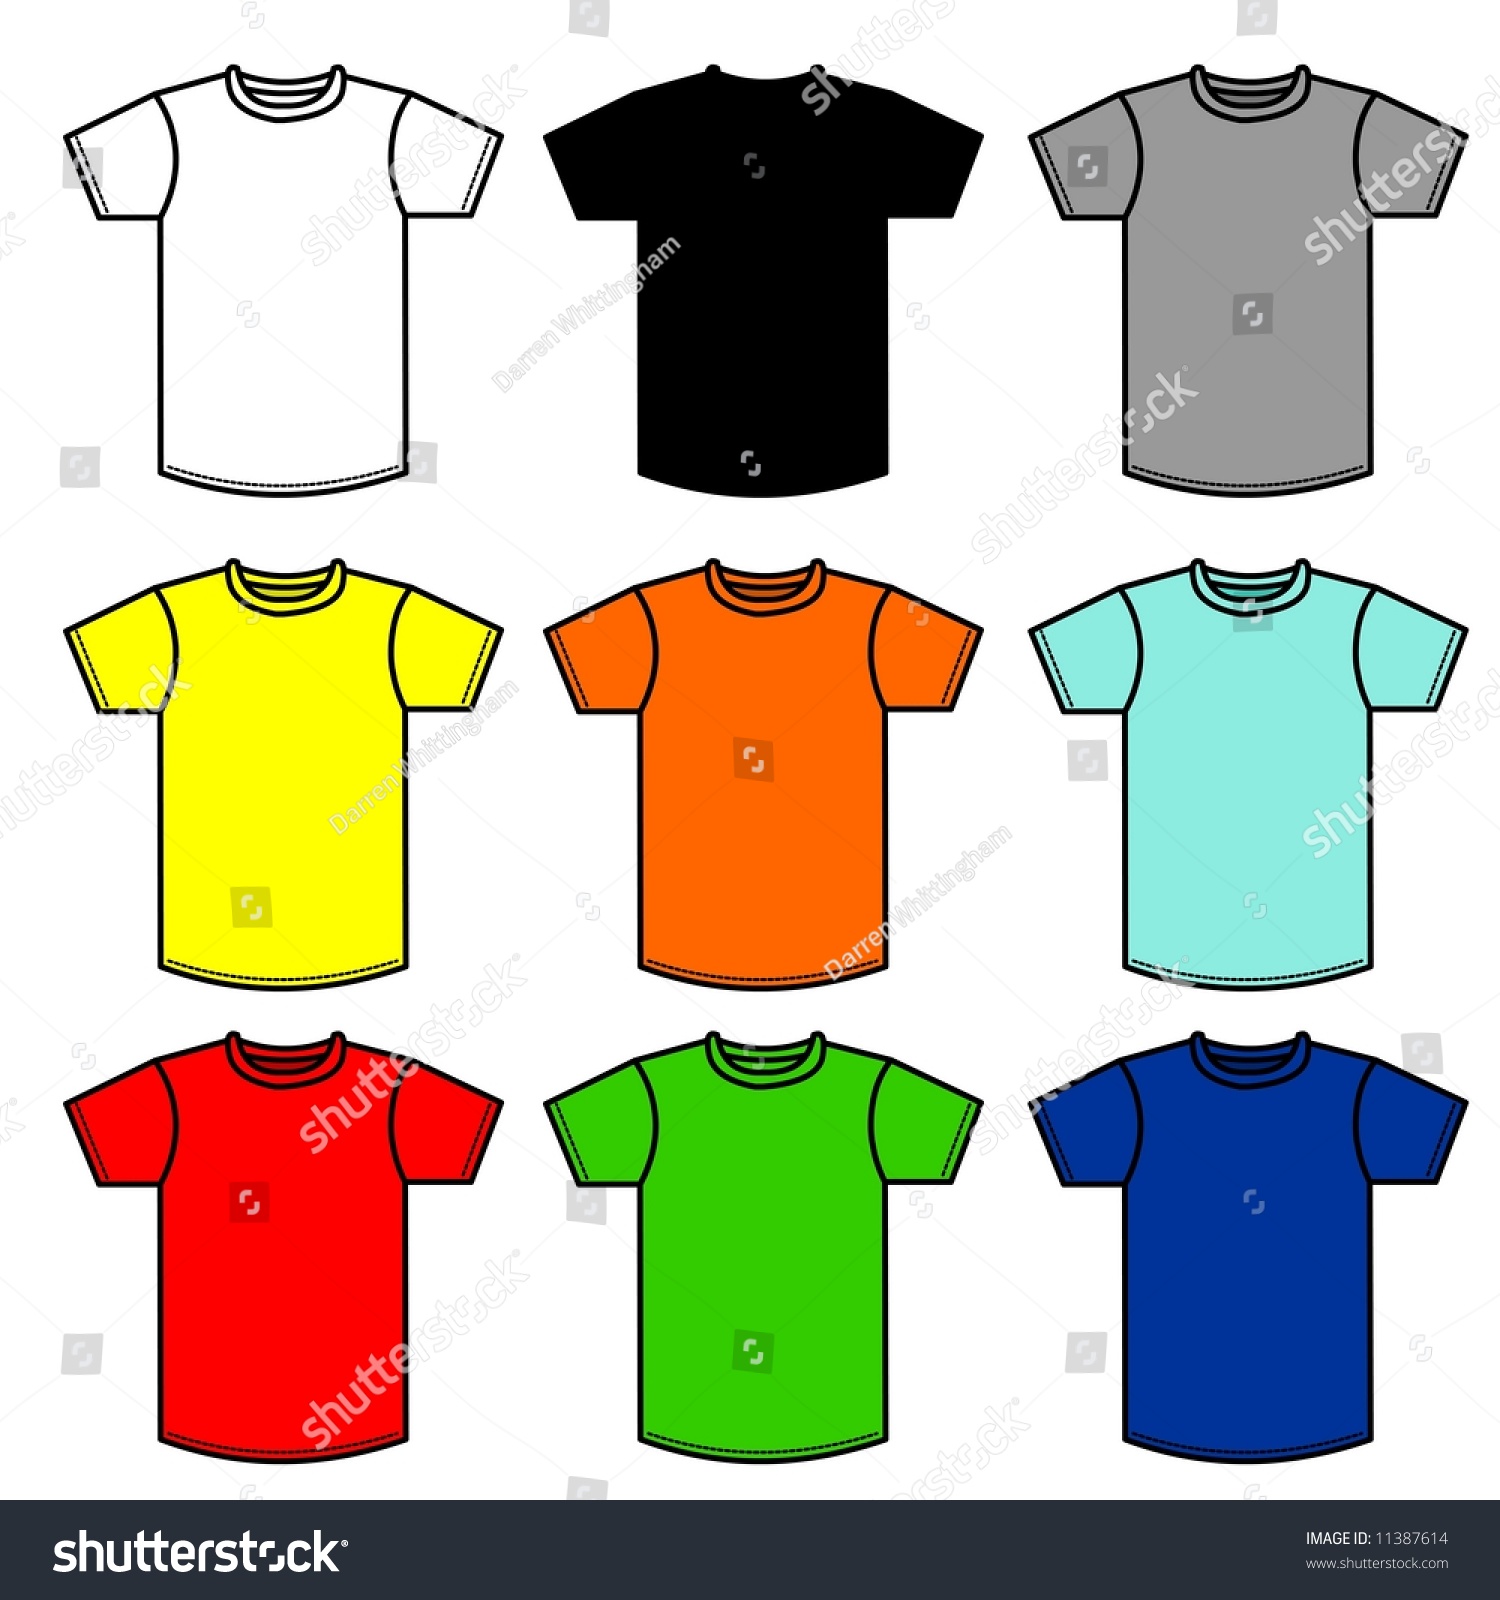 Nine T-Shirts Of Different Colors Stock Photo 11387614 : Shutterstock